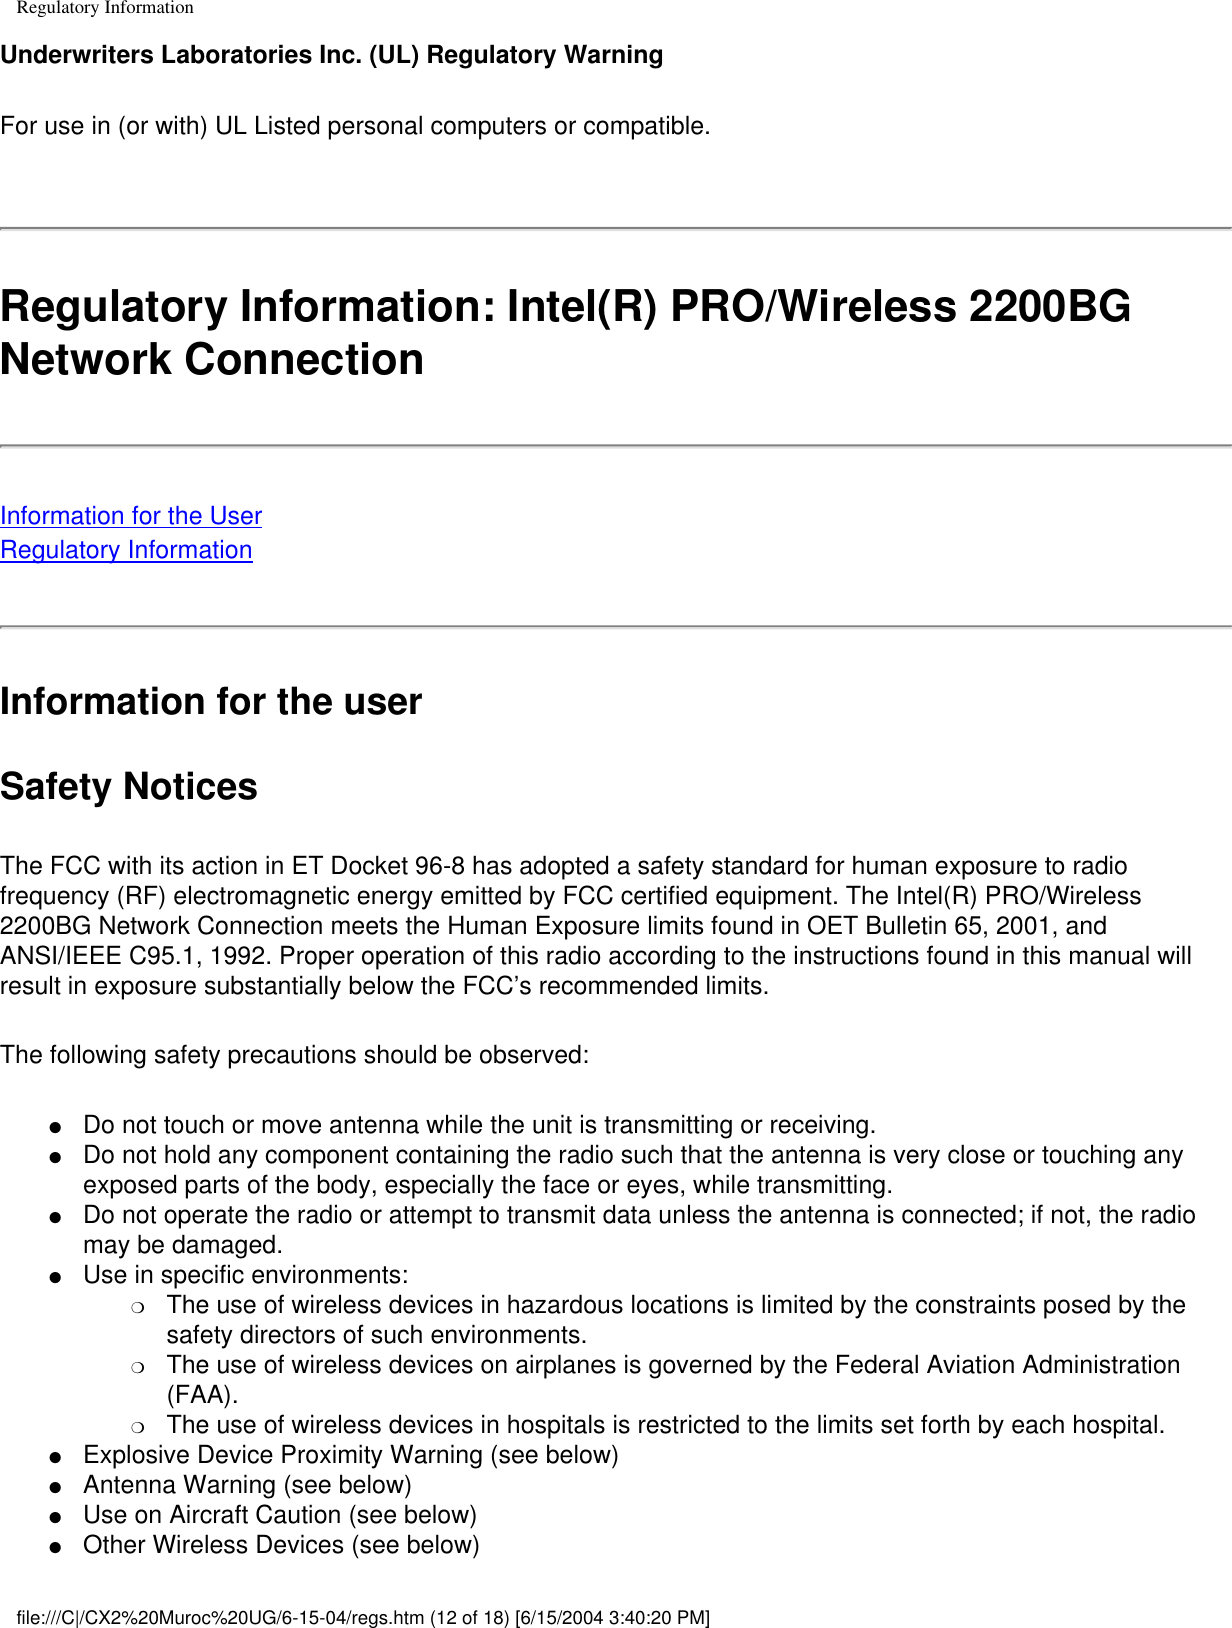 Regulatory InformationUnderwriters Laboratories Inc. (UL) Regulatory WarningFor use in (or with) UL Listed personal computers or compatible. Regulatory Information: Intel(R) PRO/Wireless 2200BG Network Connection Information for the UserRegulatory InformationInformation for the userSafety NoticesThe FCC with its action in ET Docket 96-8 has adopted a safety standard for human exposure to radio frequency (RF) electromagnetic energy emitted by FCC certified equipment. The Intel(R) PRO/Wireless 2200BG Network Connection meets the Human Exposure limits found in OET Bulletin 65, 2001, and ANSI/IEEE C95.1, 1992. Proper operation of this radio according to the instructions found in this manual will result in exposure substantially below the FCC’s recommended limits.The following safety precautions should be observed:●     Do not touch or move antenna while the unit is transmitting or receiving. ●     Do not hold any component containing the radio such that the antenna is very close or touching any exposed parts of the body, especially the face or eyes, while transmitting. ●     Do not operate the radio or attempt to transmit data unless the antenna is connected; if not, the radio may be damaged. ●     Use in specific environments: ❍     The use of wireless devices in hazardous locations is limited by the constraints posed by the safety directors of such environments. ❍     The use of wireless devices on airplanes is governed by the Federal Aviation Administration (FAA). ❍     The use of wireless devices in hospitals is restricted to the limits set forth by each hospital.●     Explosive Device Proximity Warning (see below) ●     Antenna Warning (see below) ●     Use on Aircraft Caution (see below) ●     Other Wireless Devices (see below) file:///C|/CX2%20Muroc%20UG/6-15-04/regs.htm (12 of 18) [6/15/2004 3:40:20 PM]